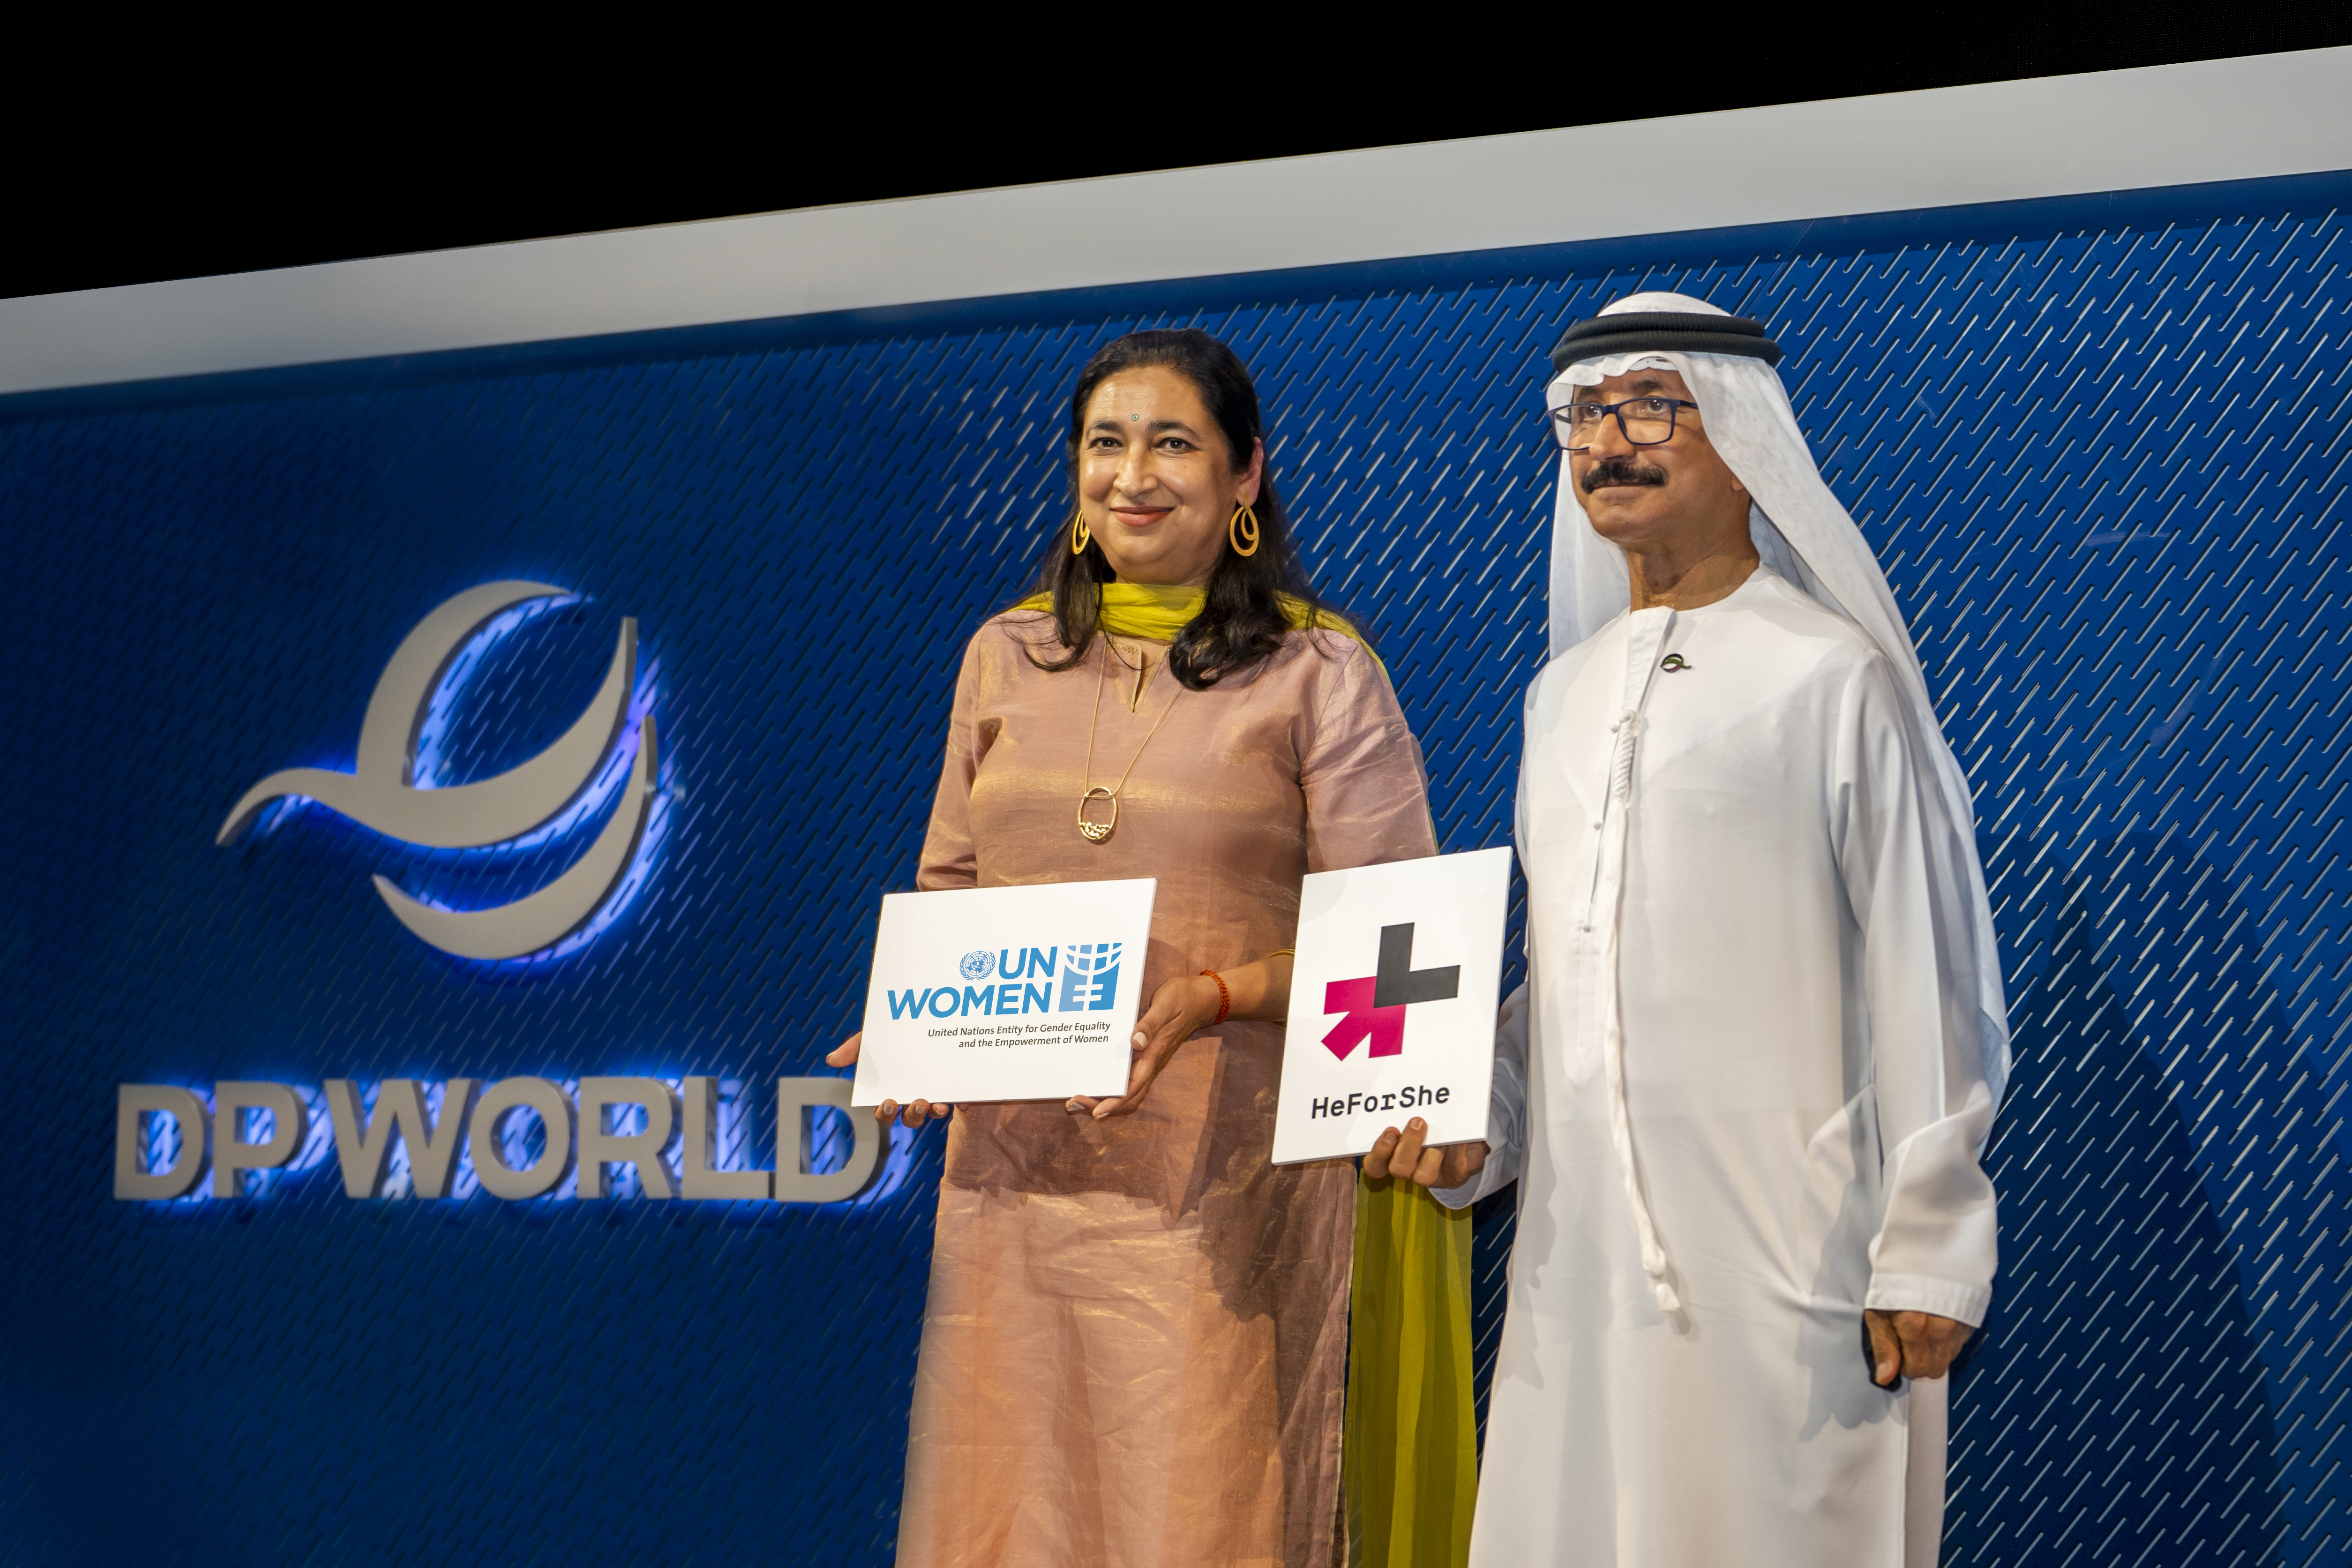 UN WOMEN ANNOUNCES DP WORLD GROUP CHAIRMAN AND CEO AS THE MIDDLE